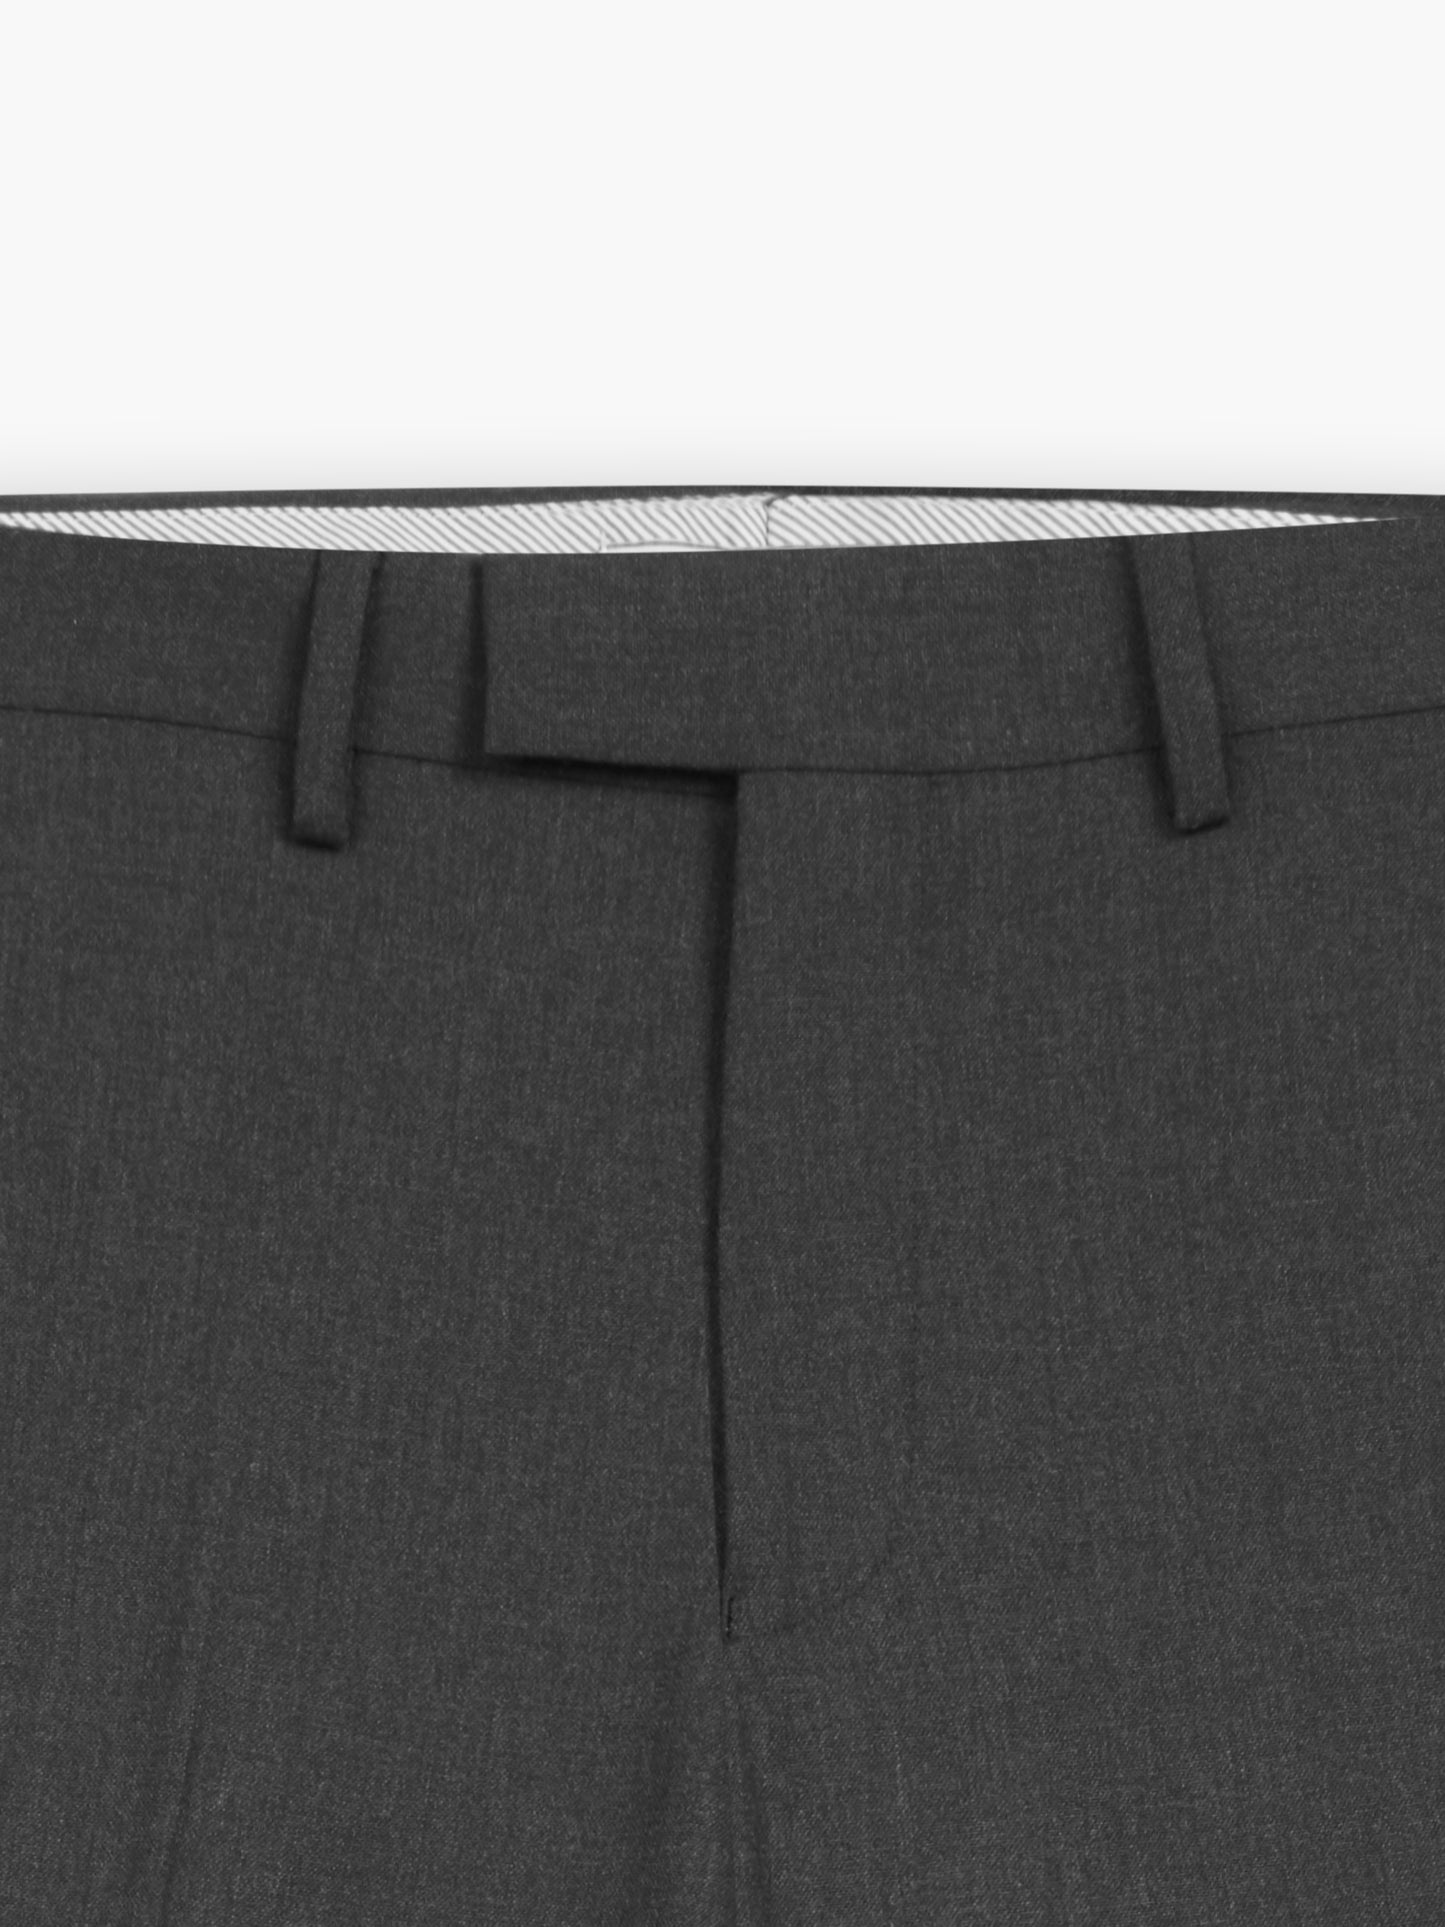 Woolwich Infinity Slim Fit Charcoal Trousers